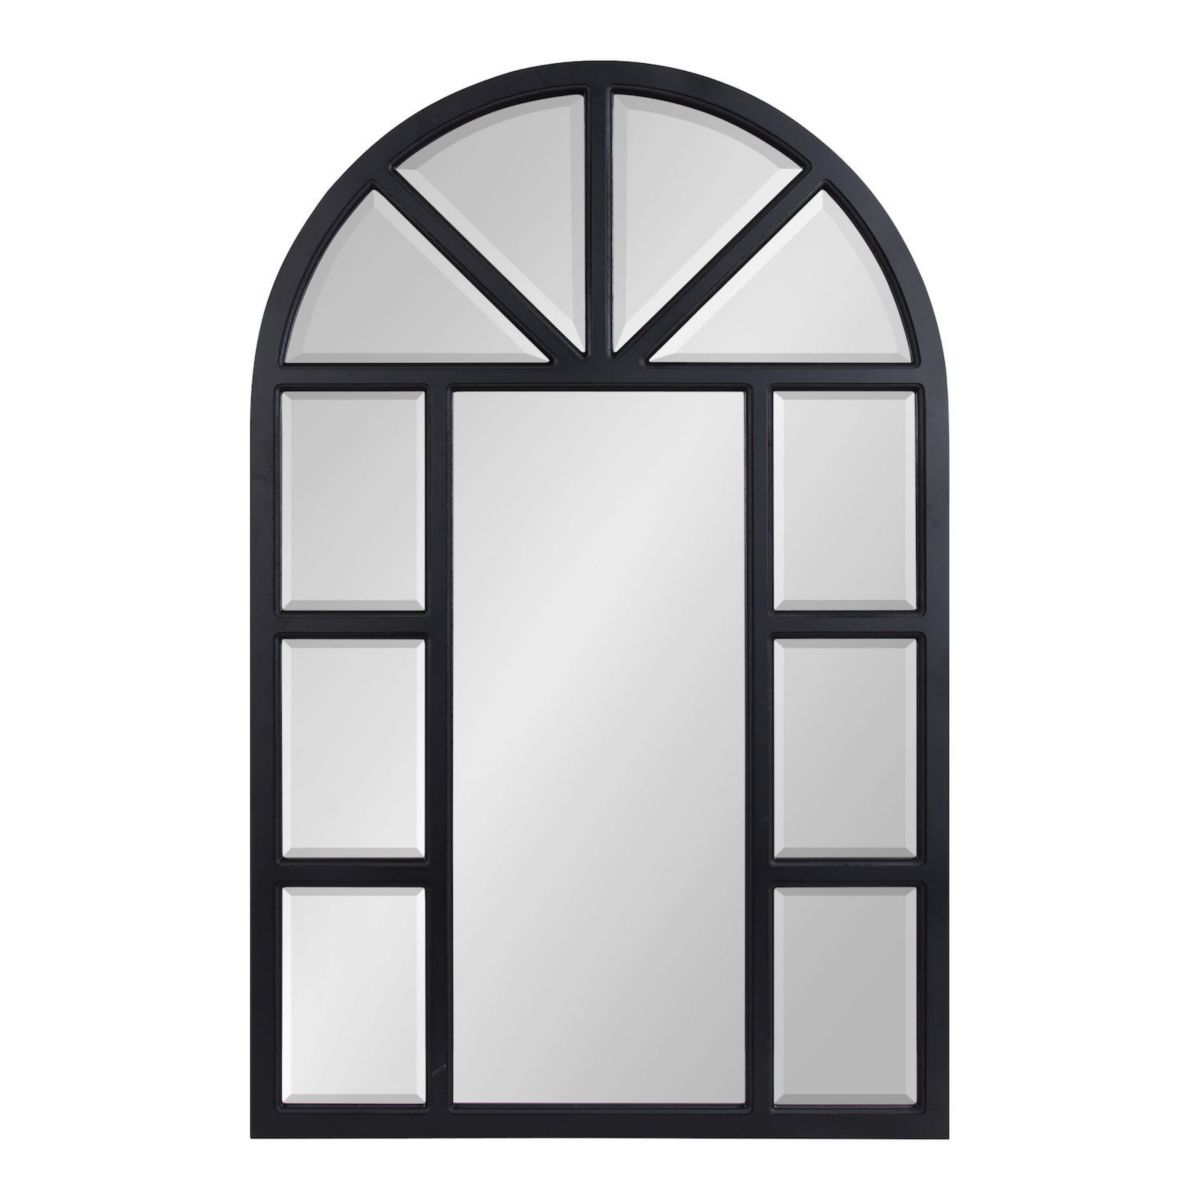 Kate and Laurel Hogan Arch Windowpane Wall Mirror Kate and Laurel